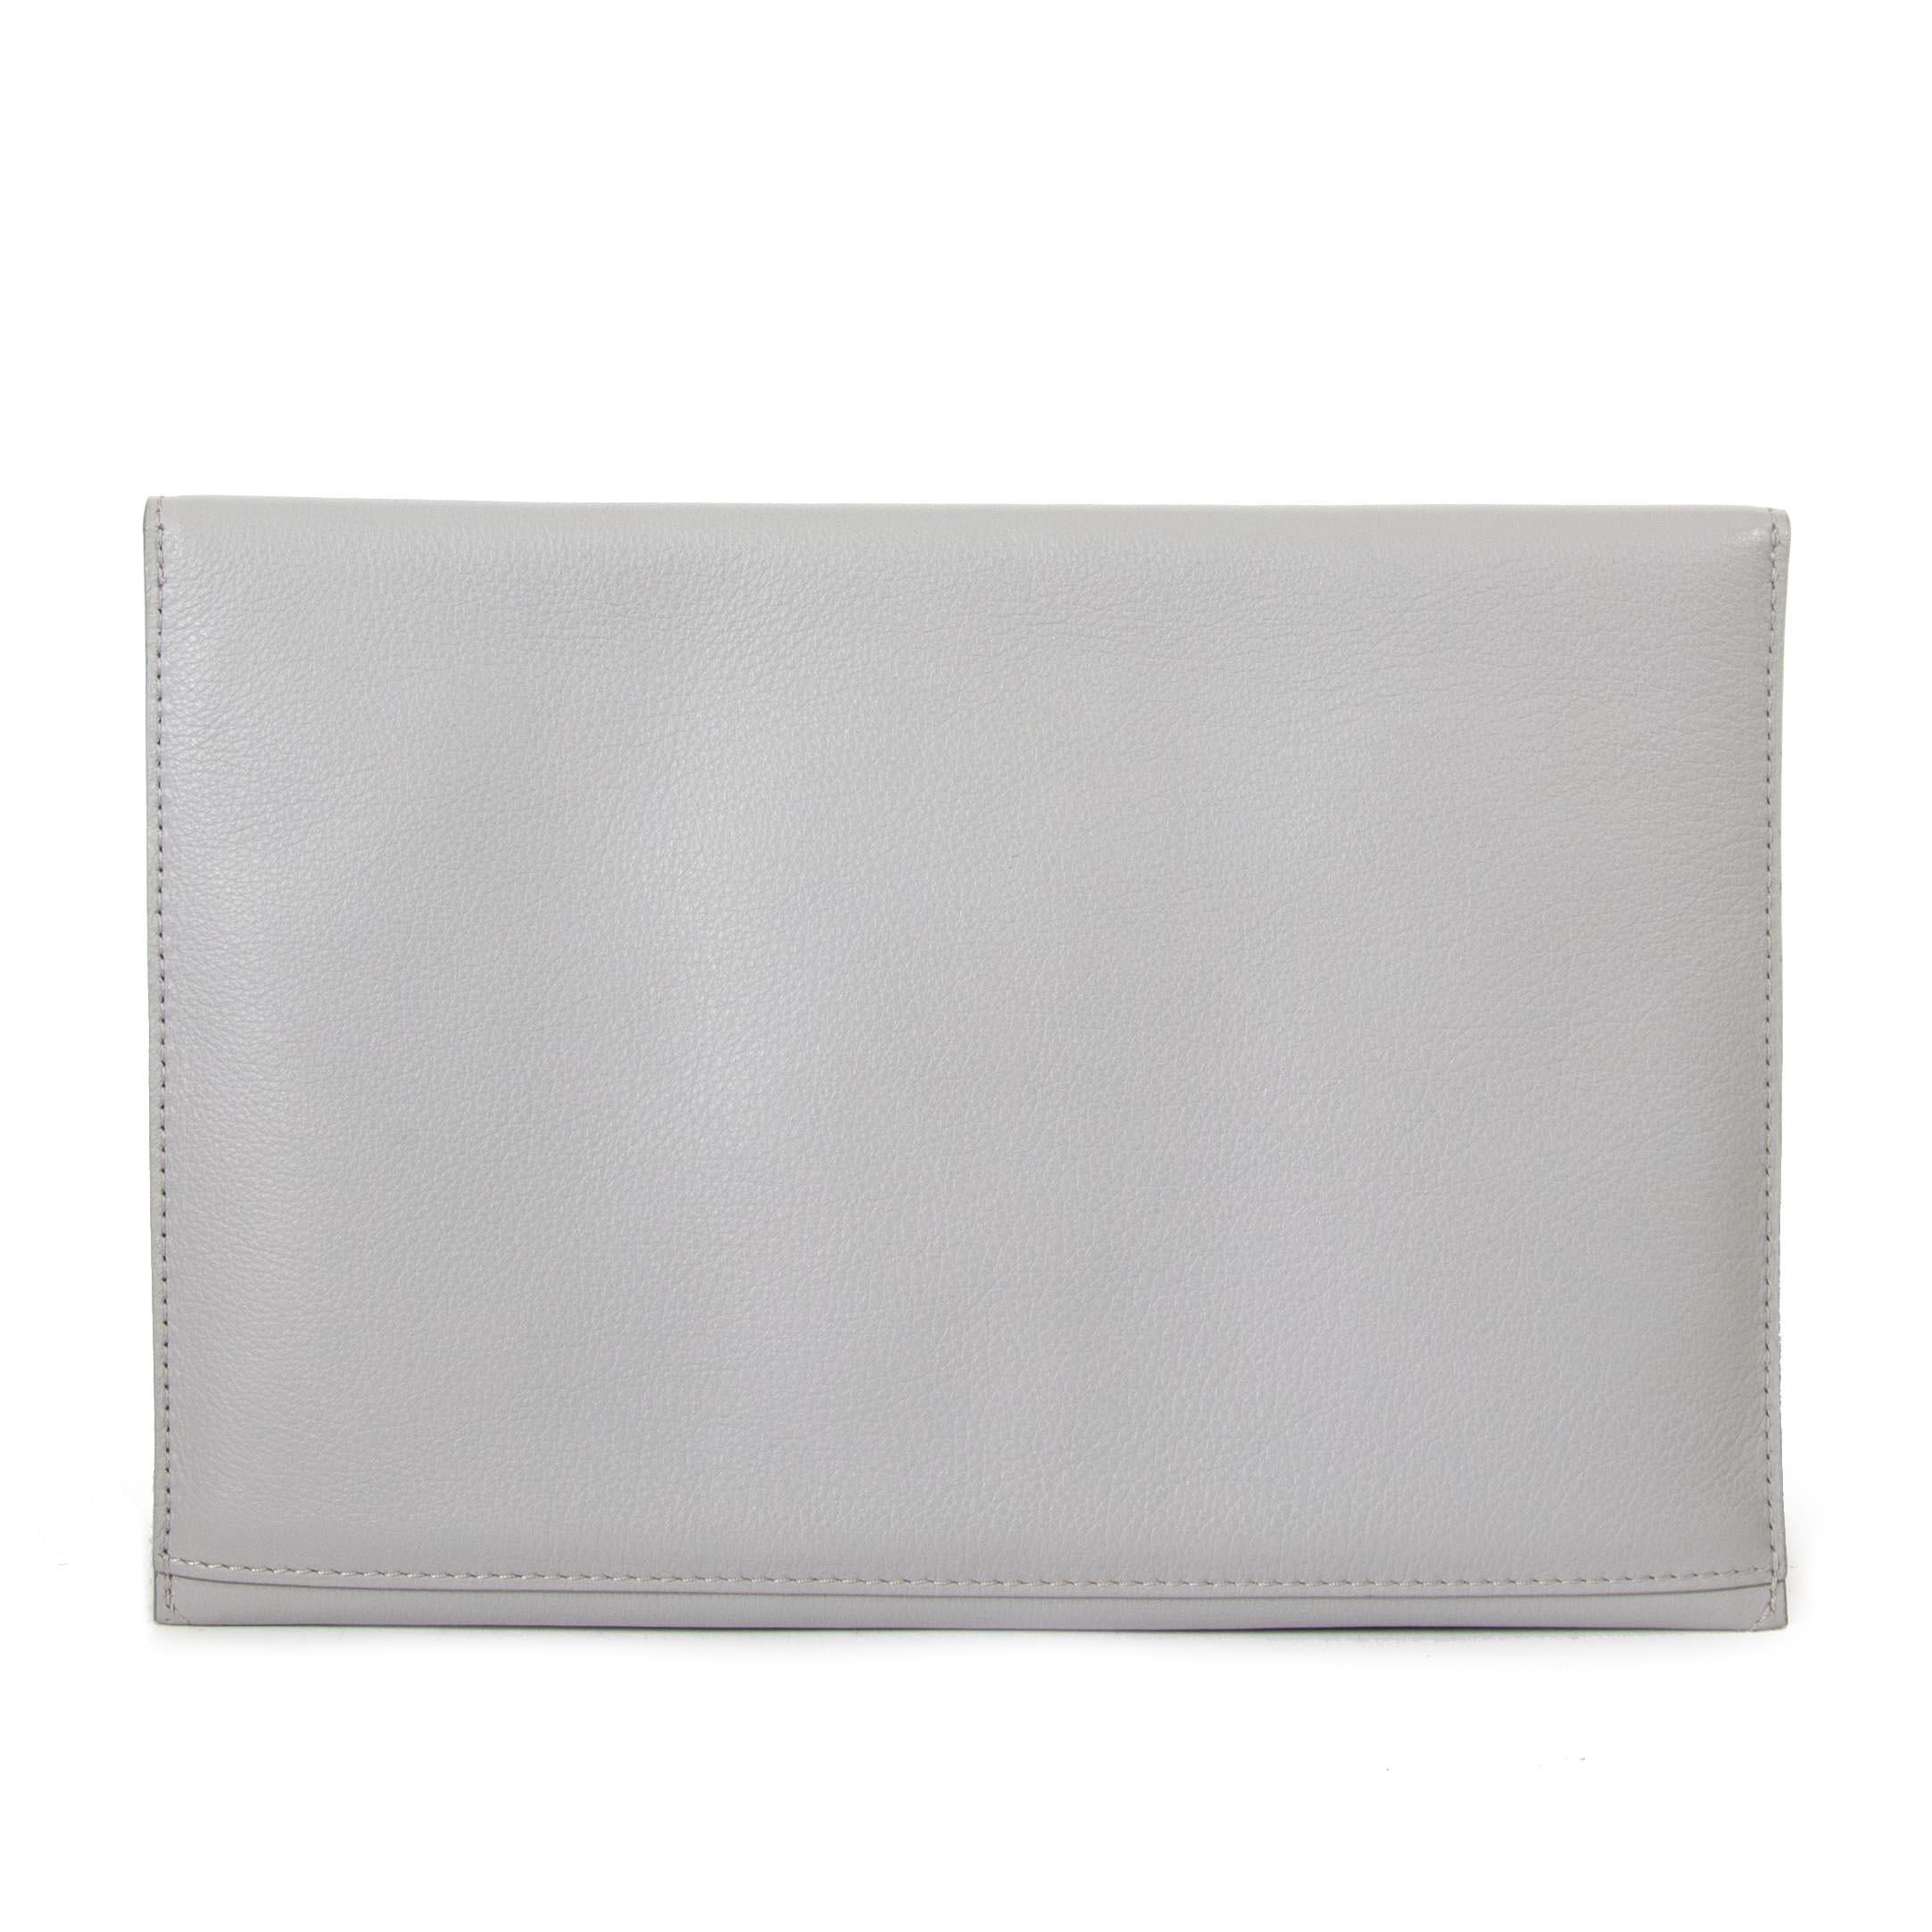 Excellent condition

Delvaux Light Grey Message Clutch

This message clutch is crafted from a light grey leather and has a bright yellow interior. The clutch is styled with a gold toned crown on the front flap. 
It opens with one push lock in the